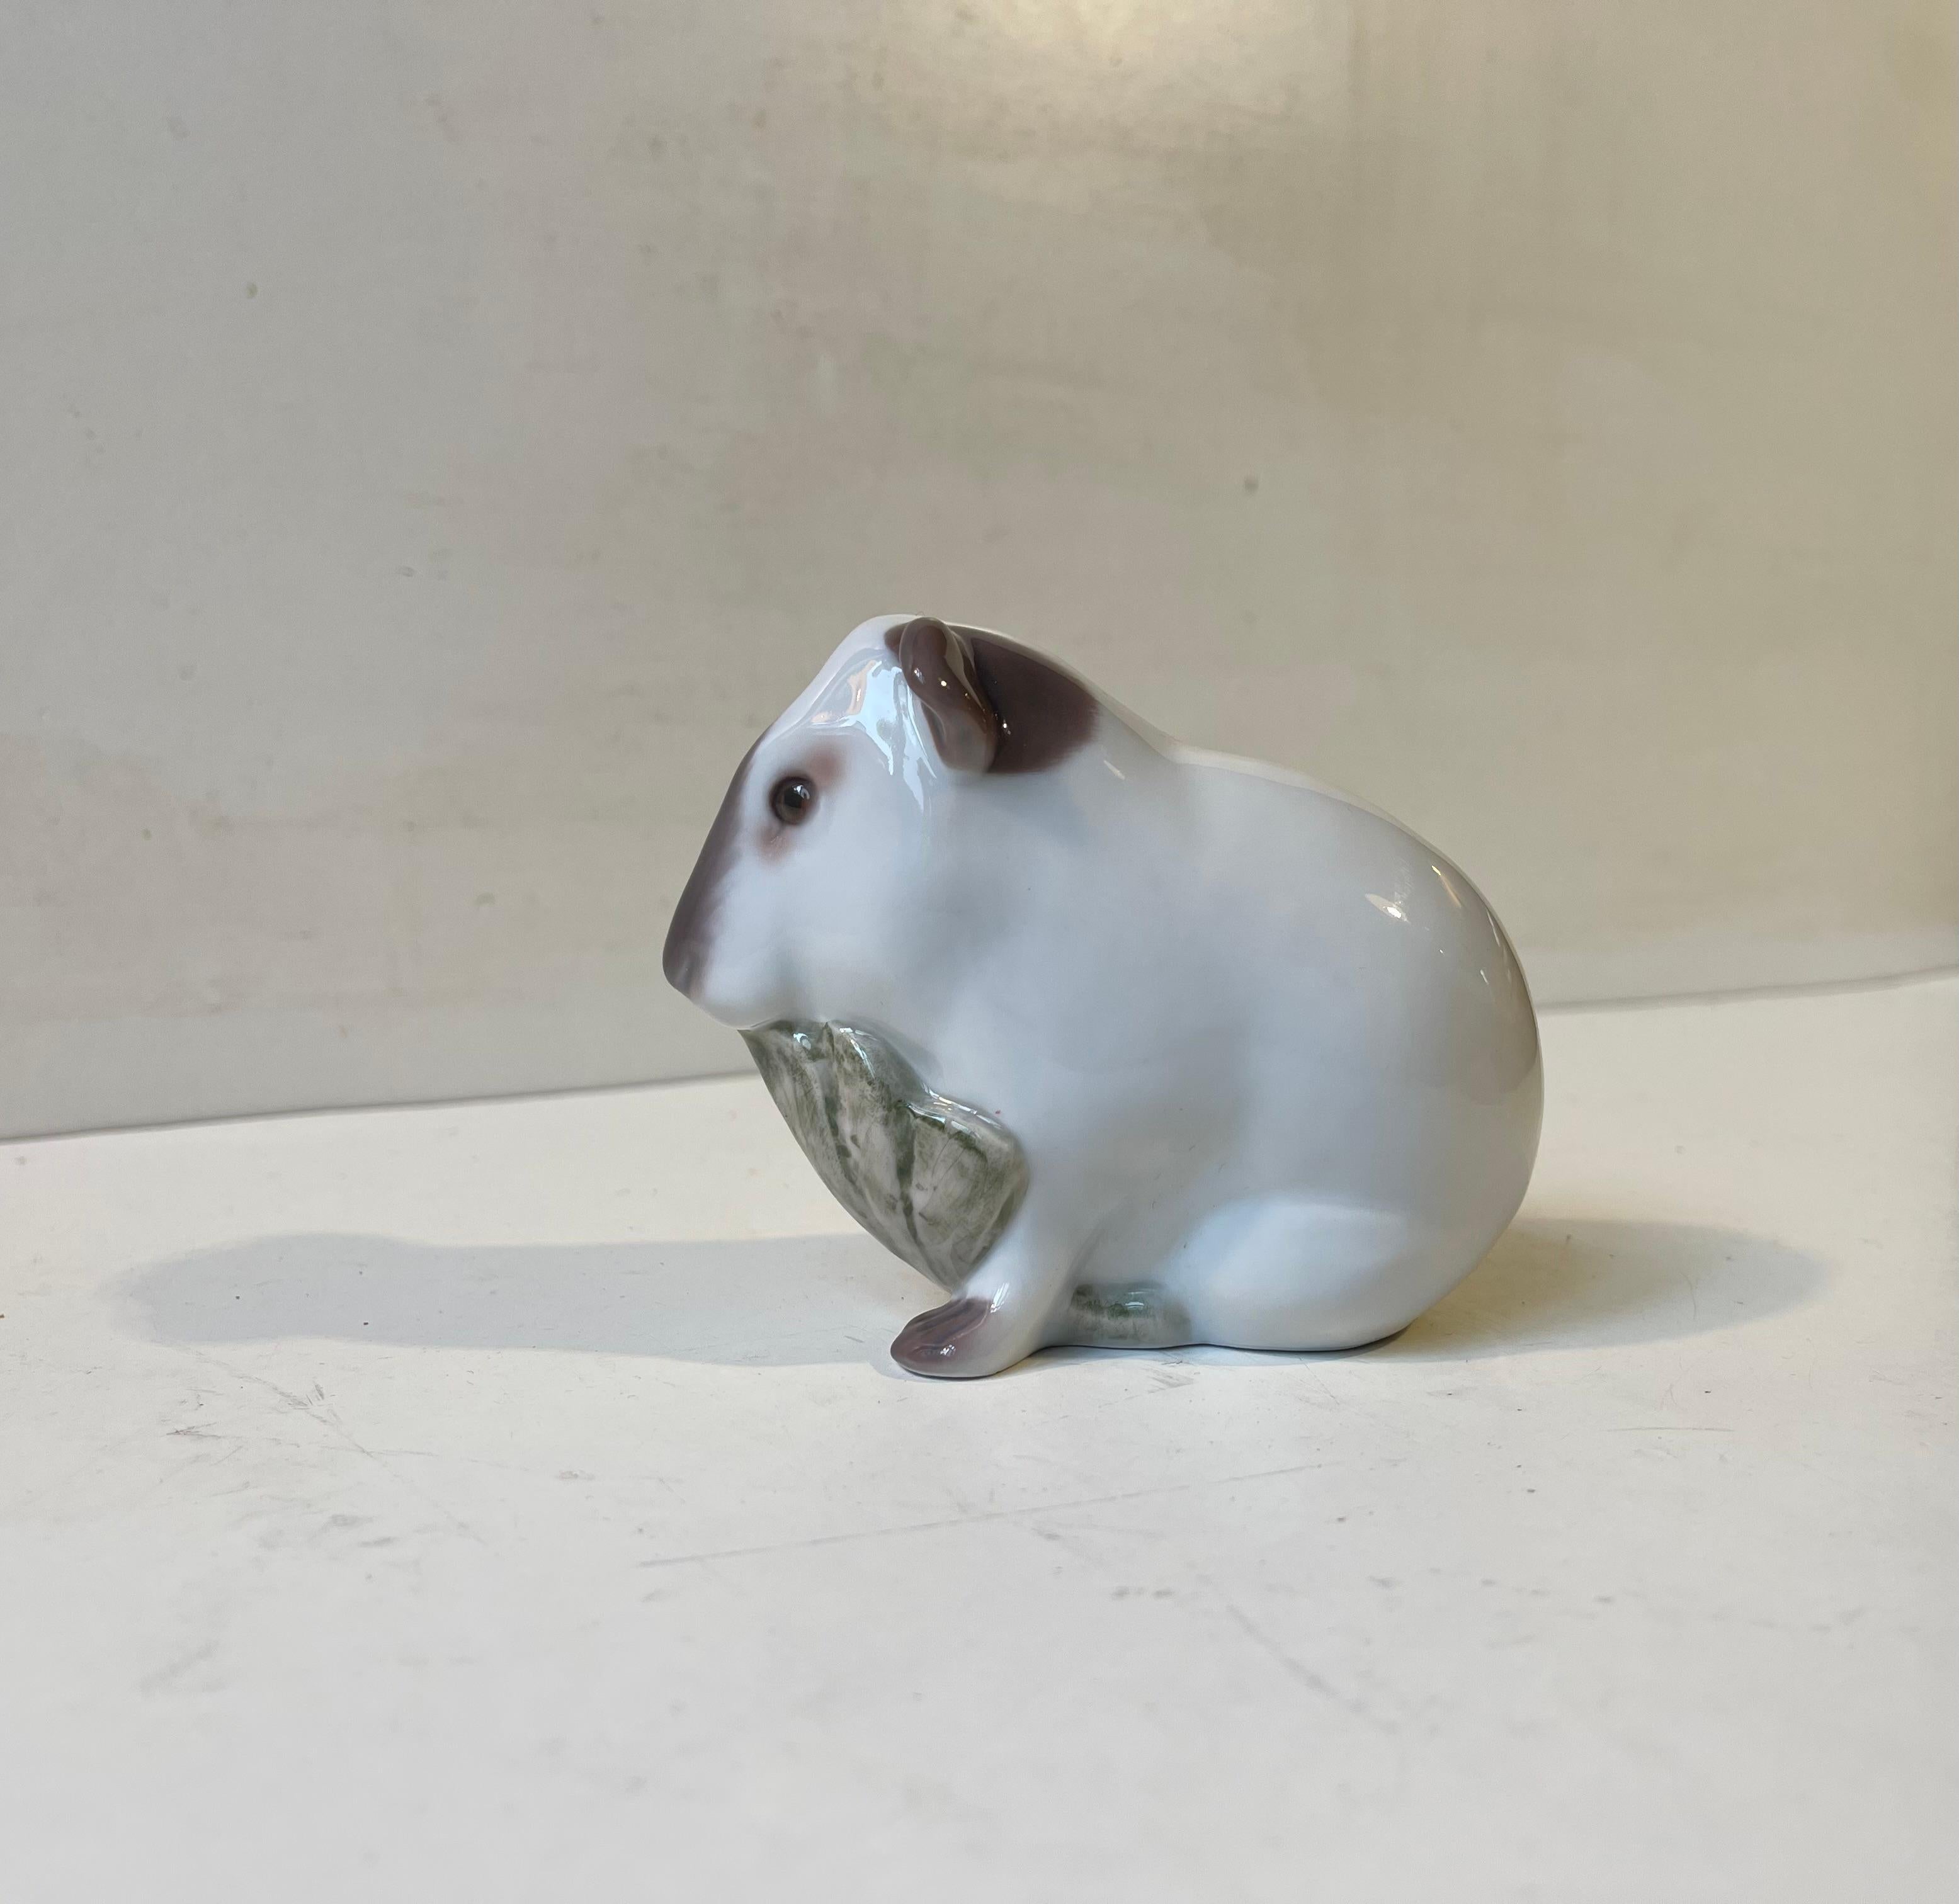 Naturalistically glazed Guinea Pig in porcelain by Bing & Grondahl in Denmark. Based upon a antique dessin this particular example was made circa 1970-80. Decoration number 2489. The condition is wellkept, clean and intact. Measurements: 11/8/6 cm.